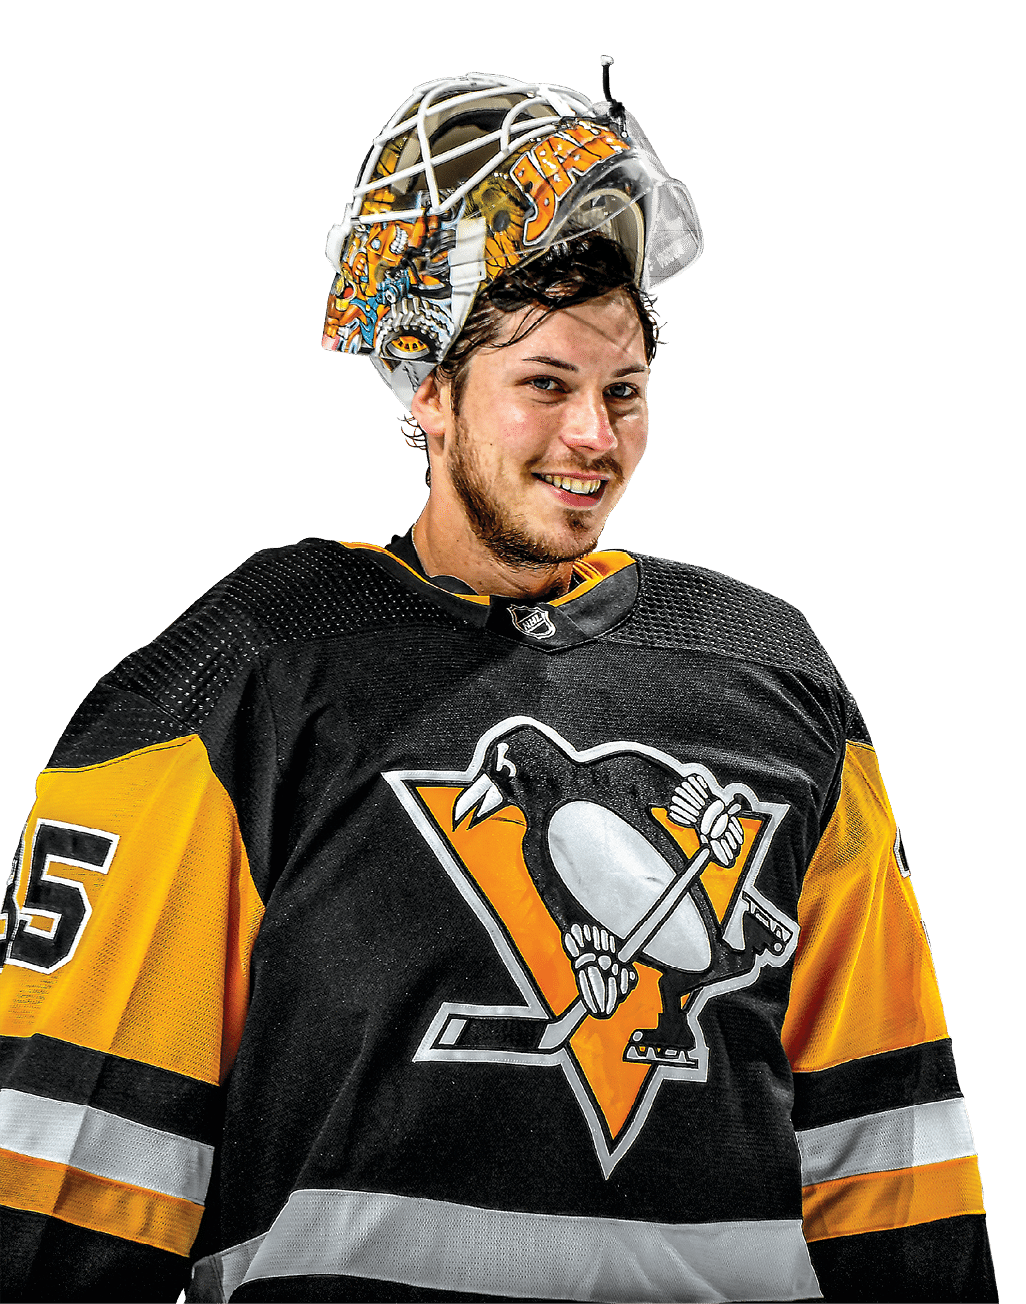 PITTSBURGH, PA - OCTOBER 16: Tristan Jarry #35 of the Pittsburgh Penguins looks on against the Chicago Blackhawks at PPG PAINTS Arena on October 16, 2021 in Pittsburgh, Pennsylvania  (Photo by Joe Sargent NHLI via Getty Images)